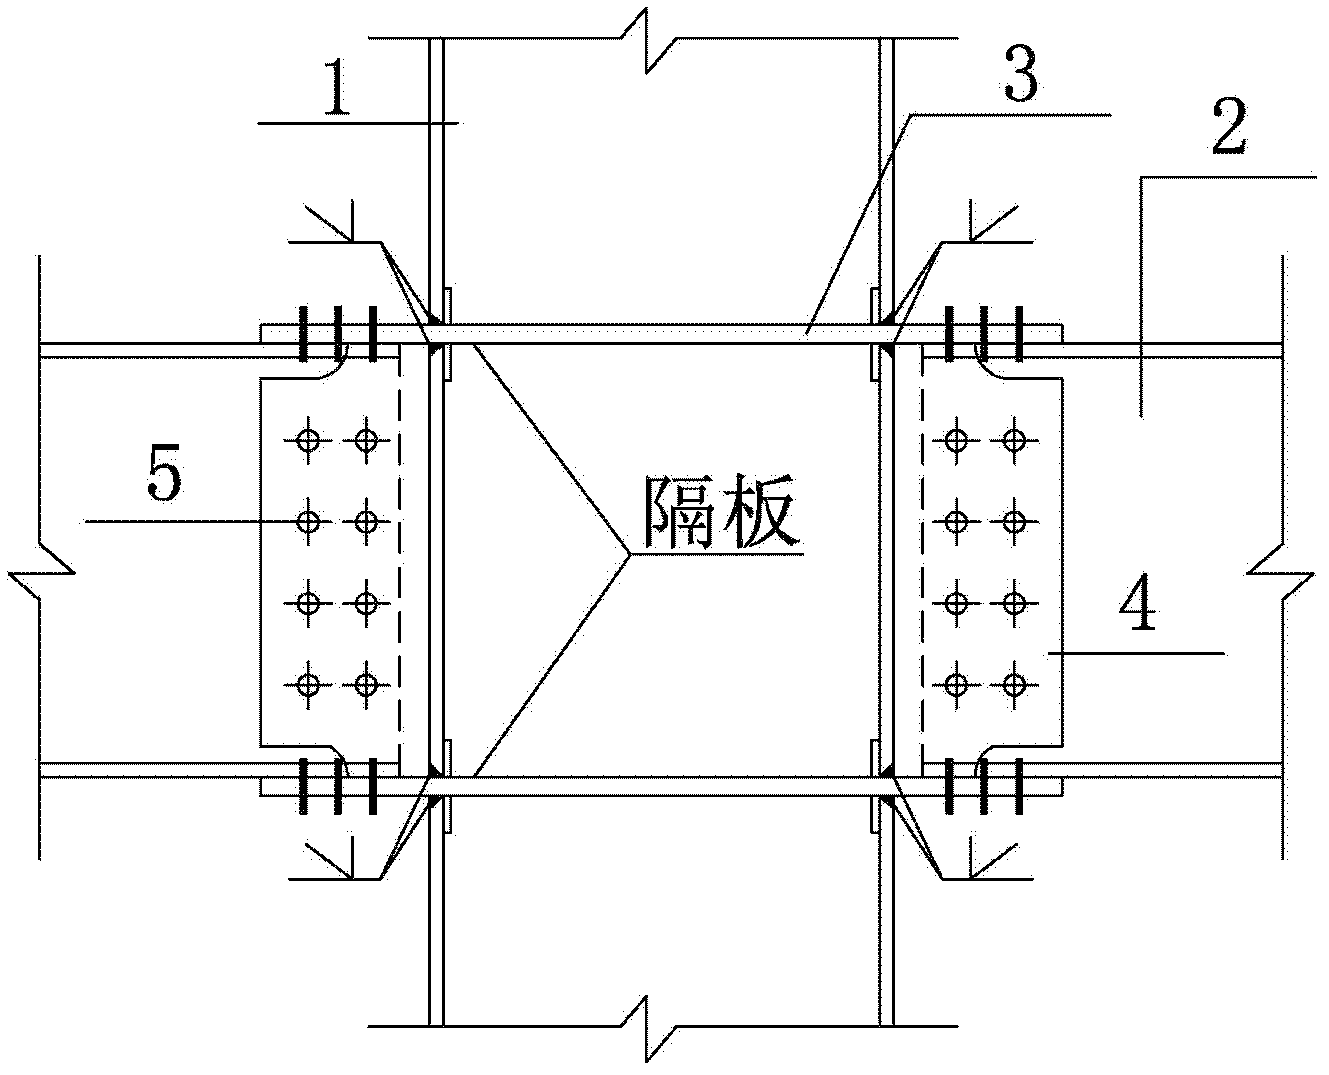 Rectangular steel tube concrete column and steel beam all-bolt connecting joint